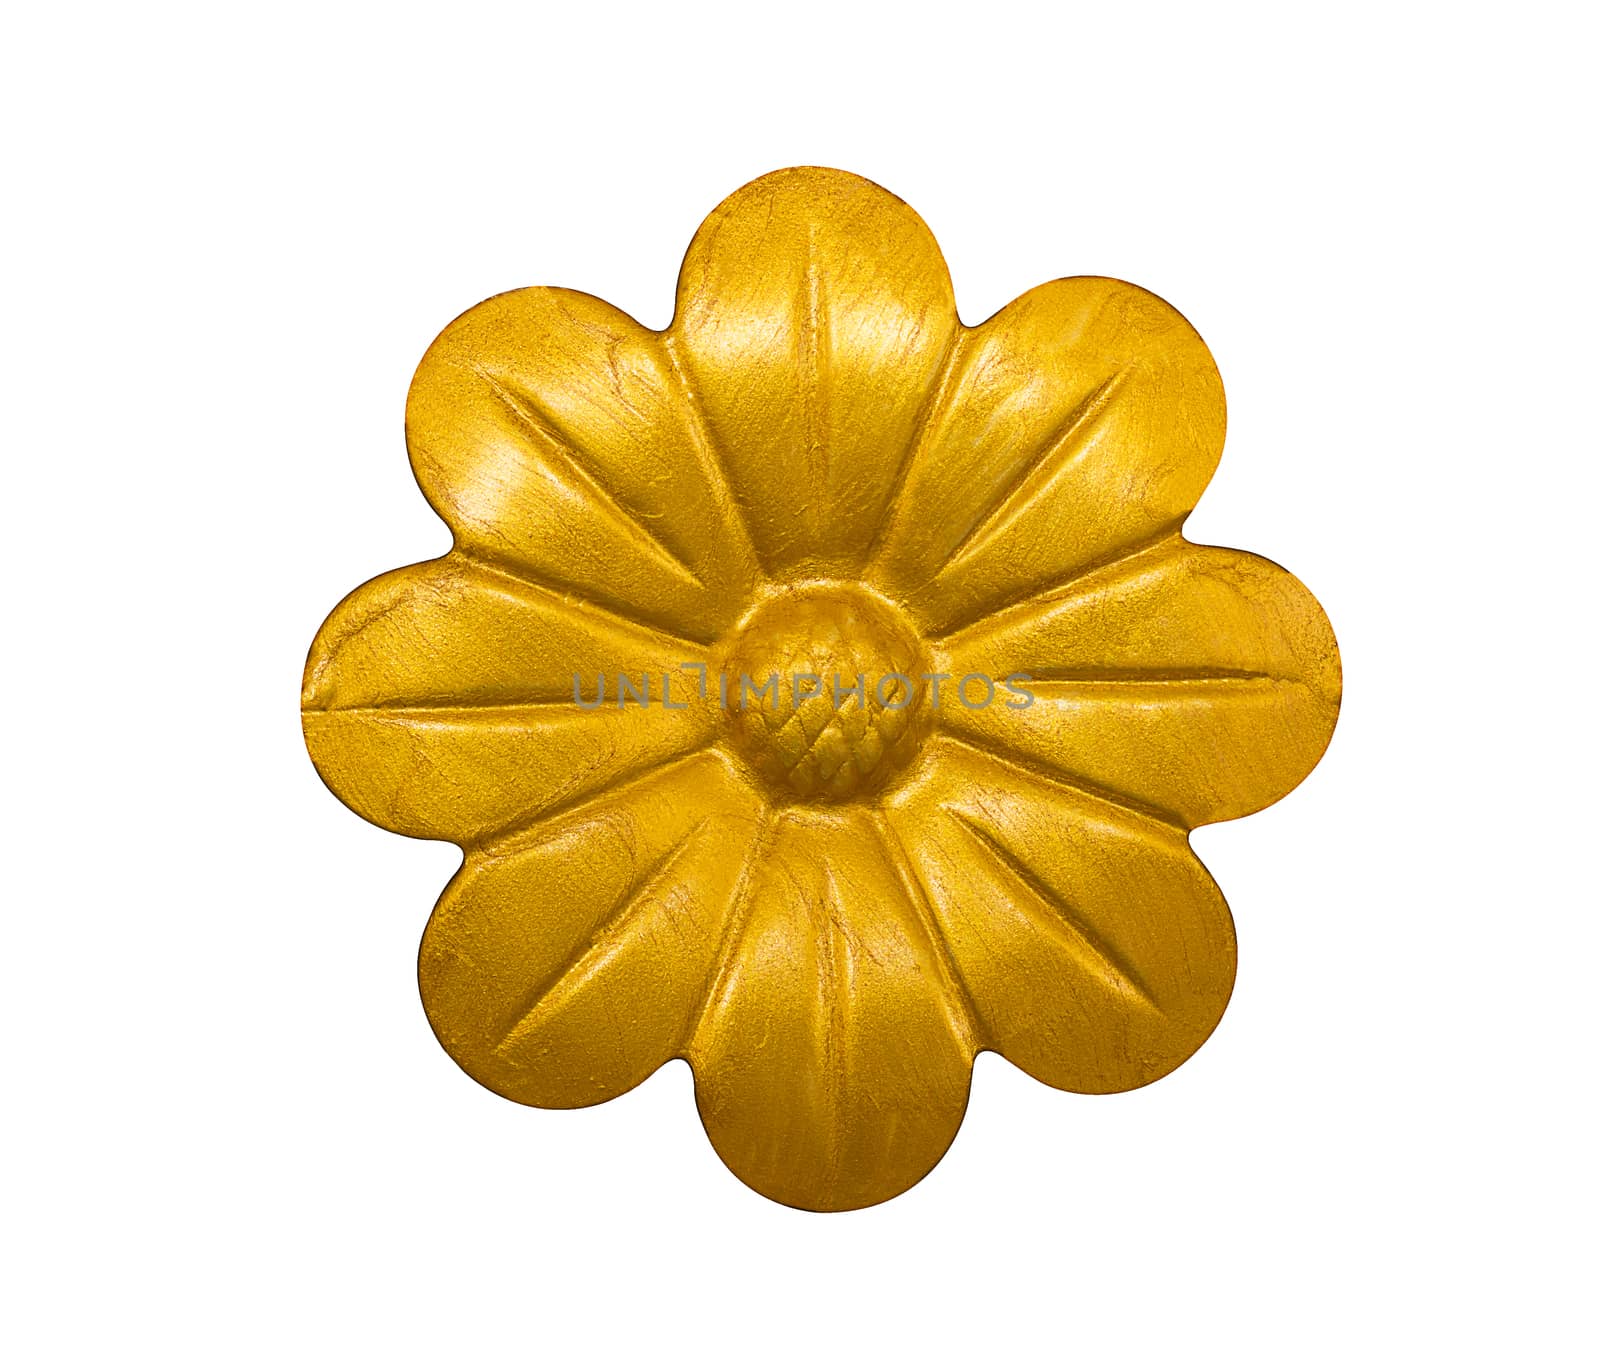 Old iron golden flower on white background, vintage and retro style